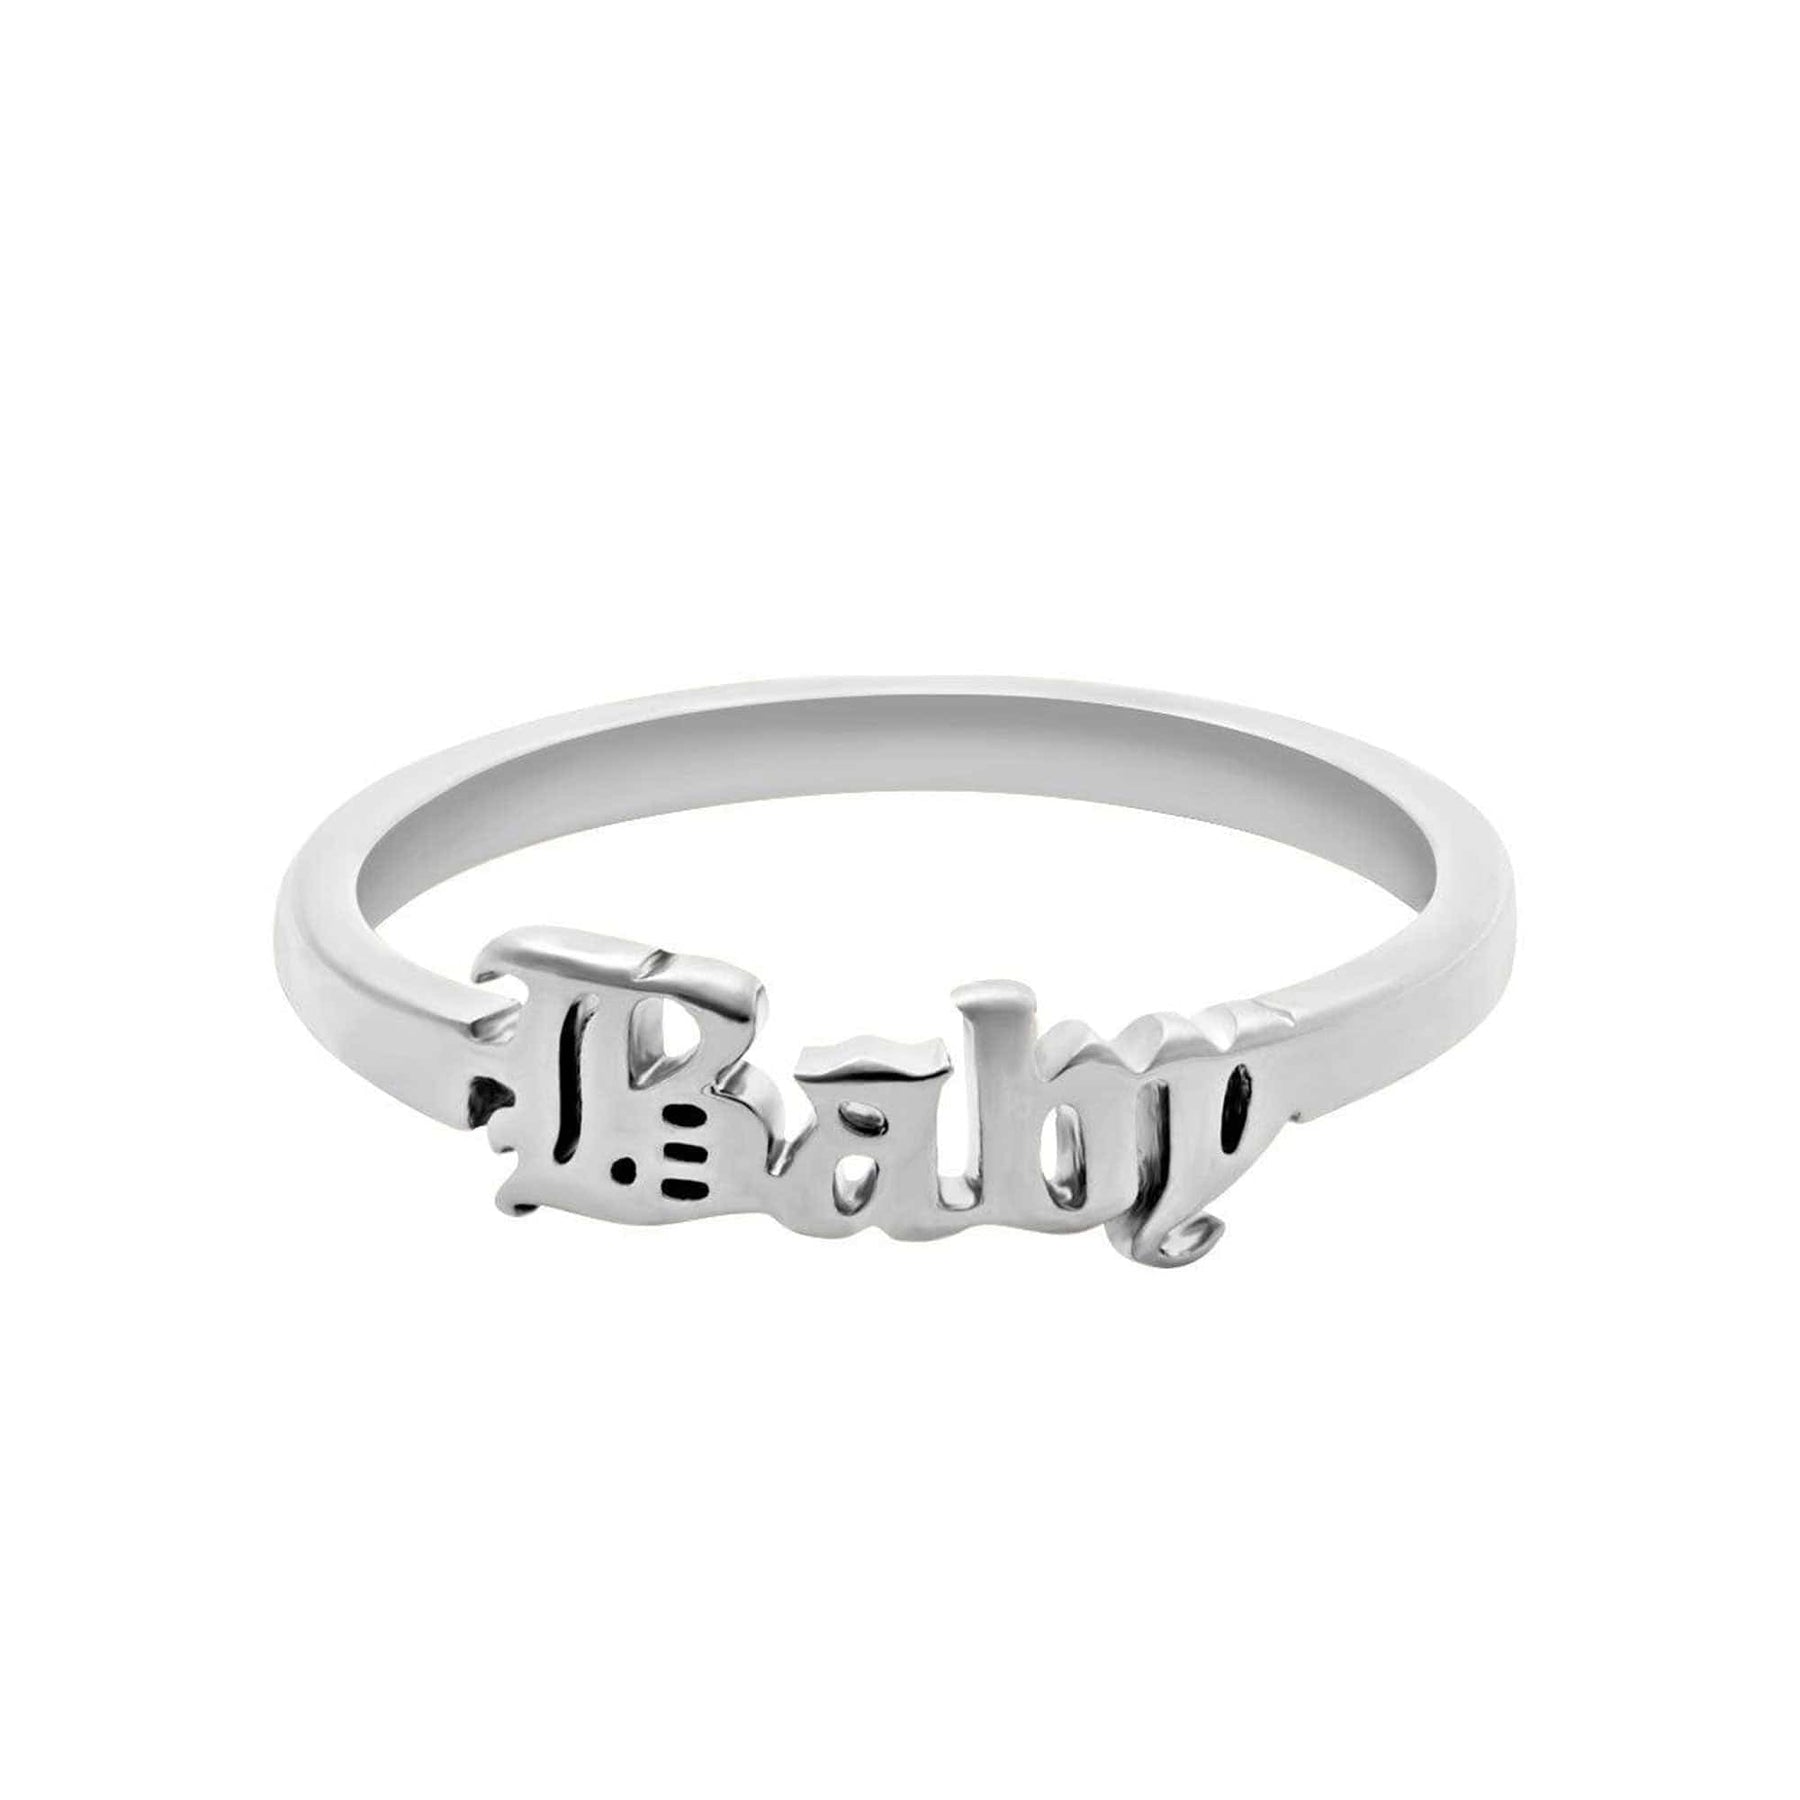 BohoMoon Stainless Steel Baby Ring Silver / US 6 / UK L / EUR 51 (small)